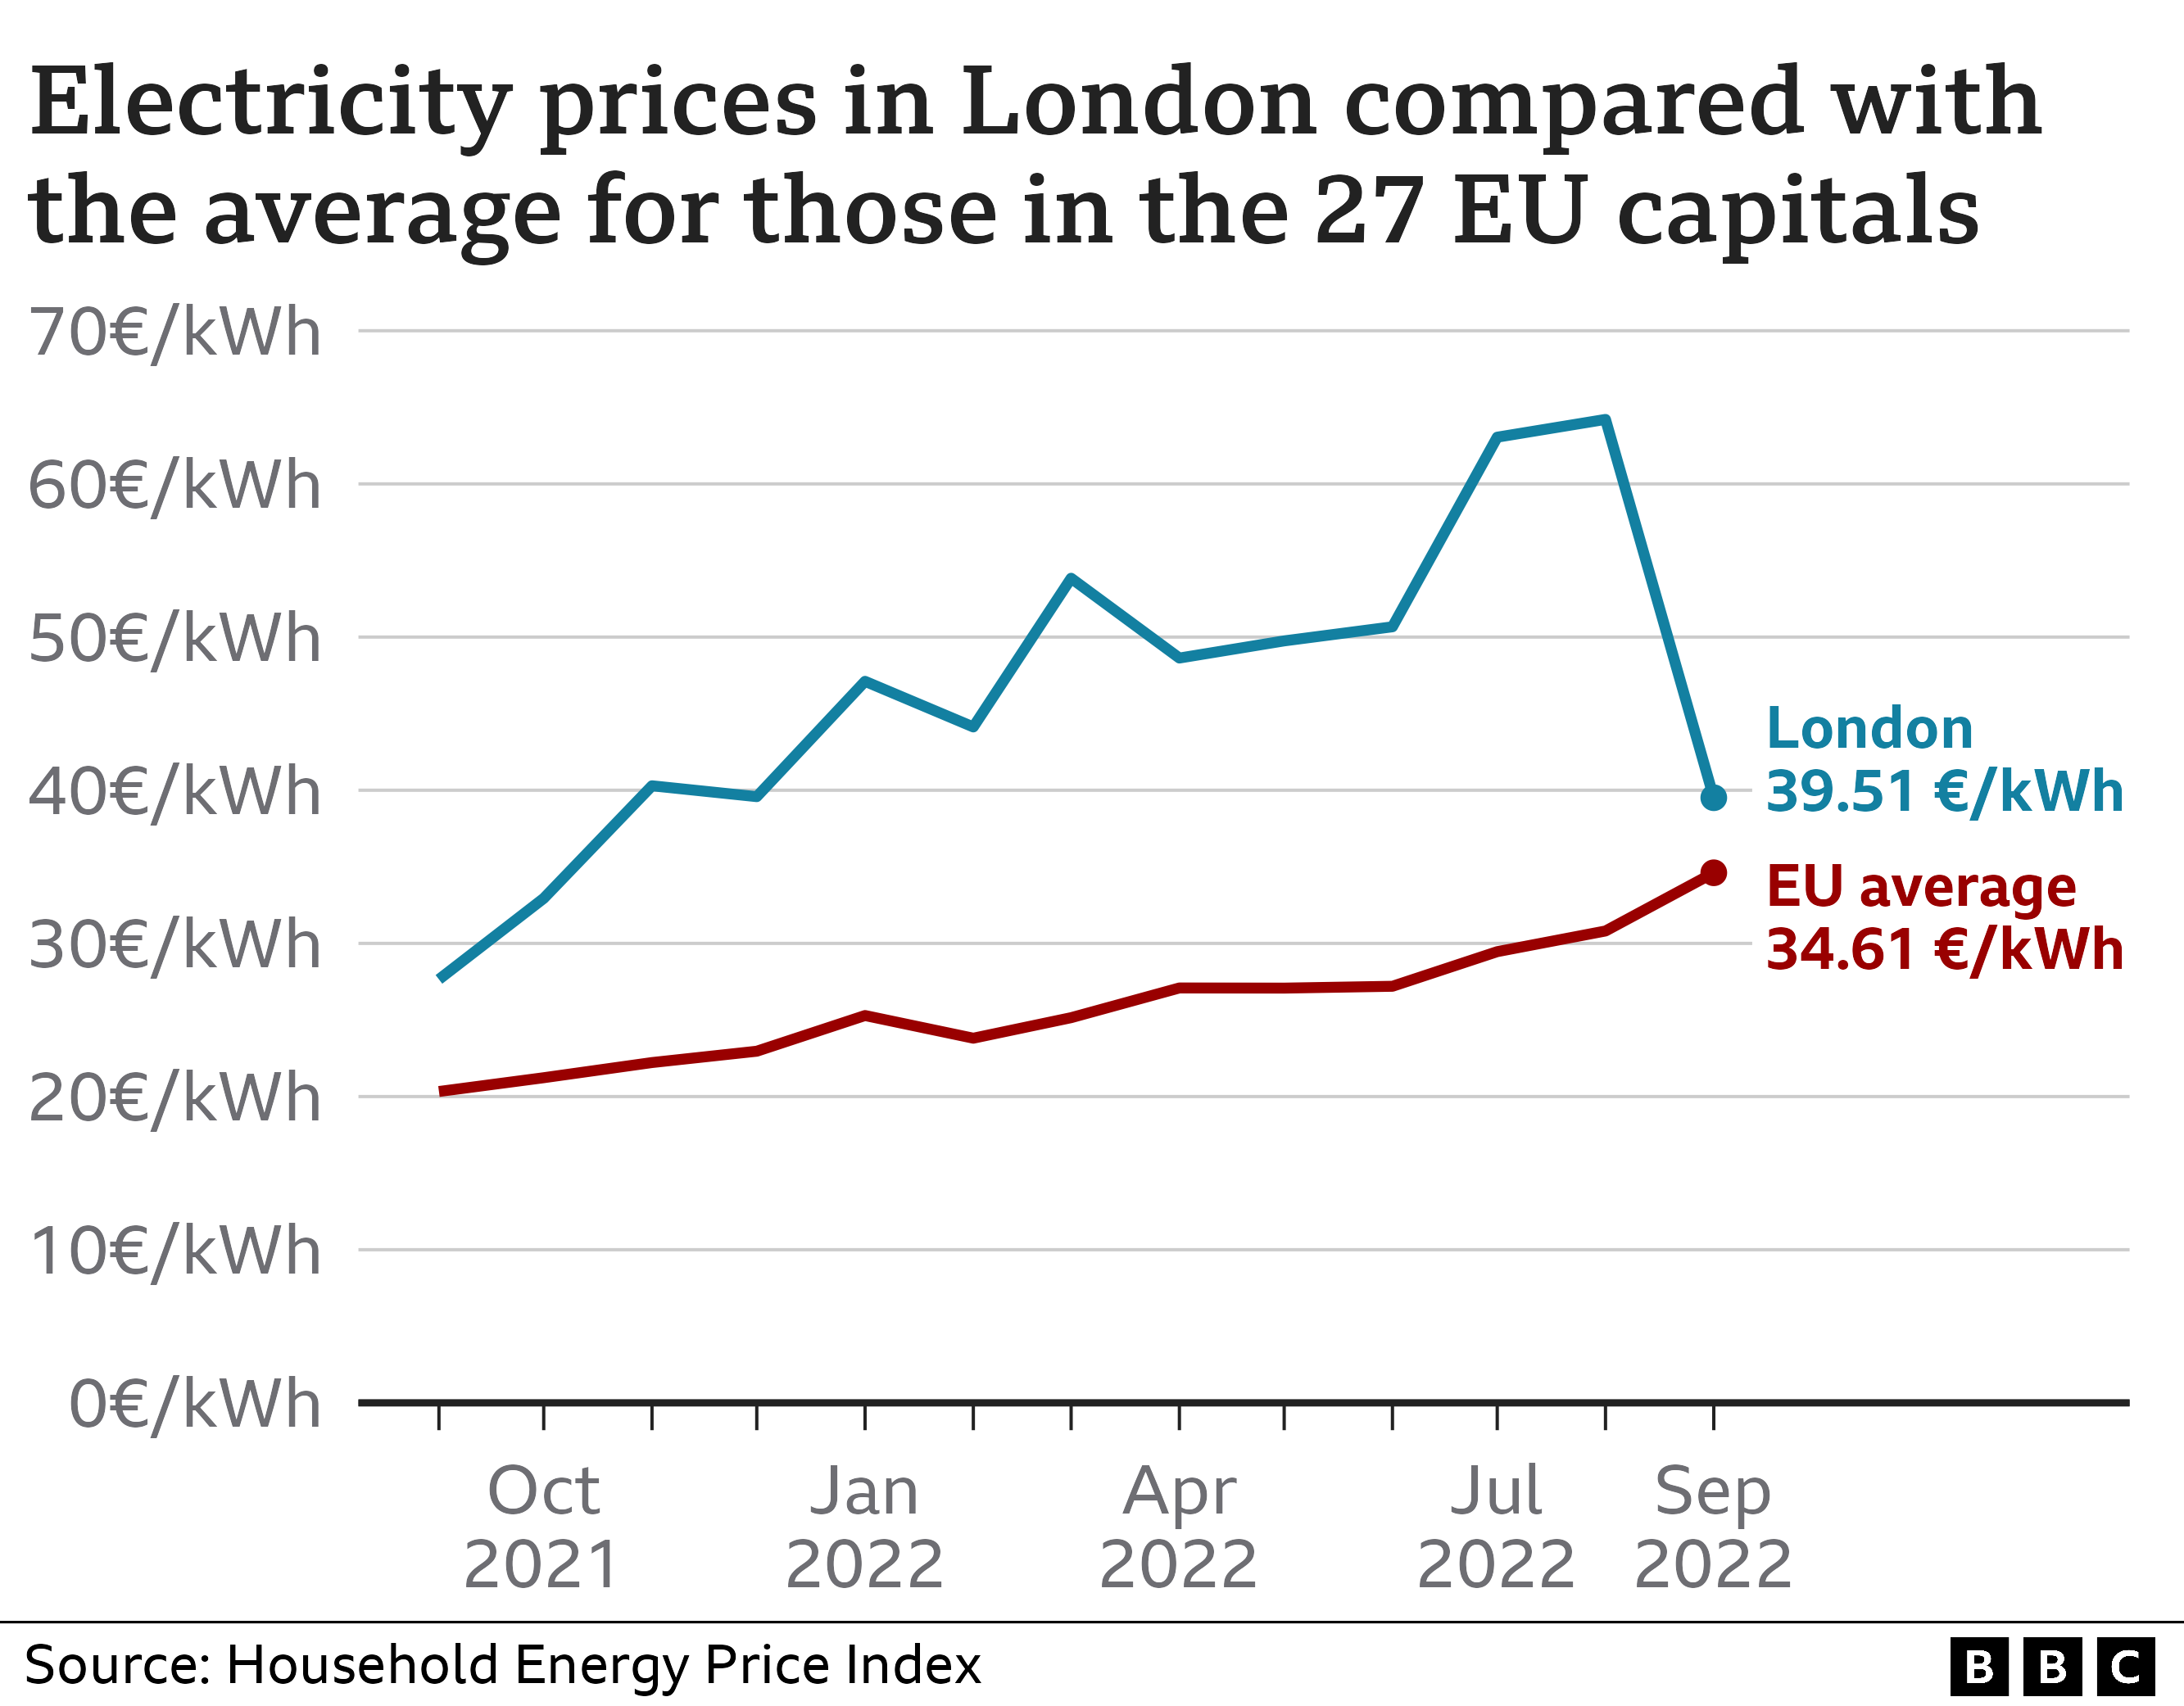 Electricity prices in London compared to the average in 27 EU capitals